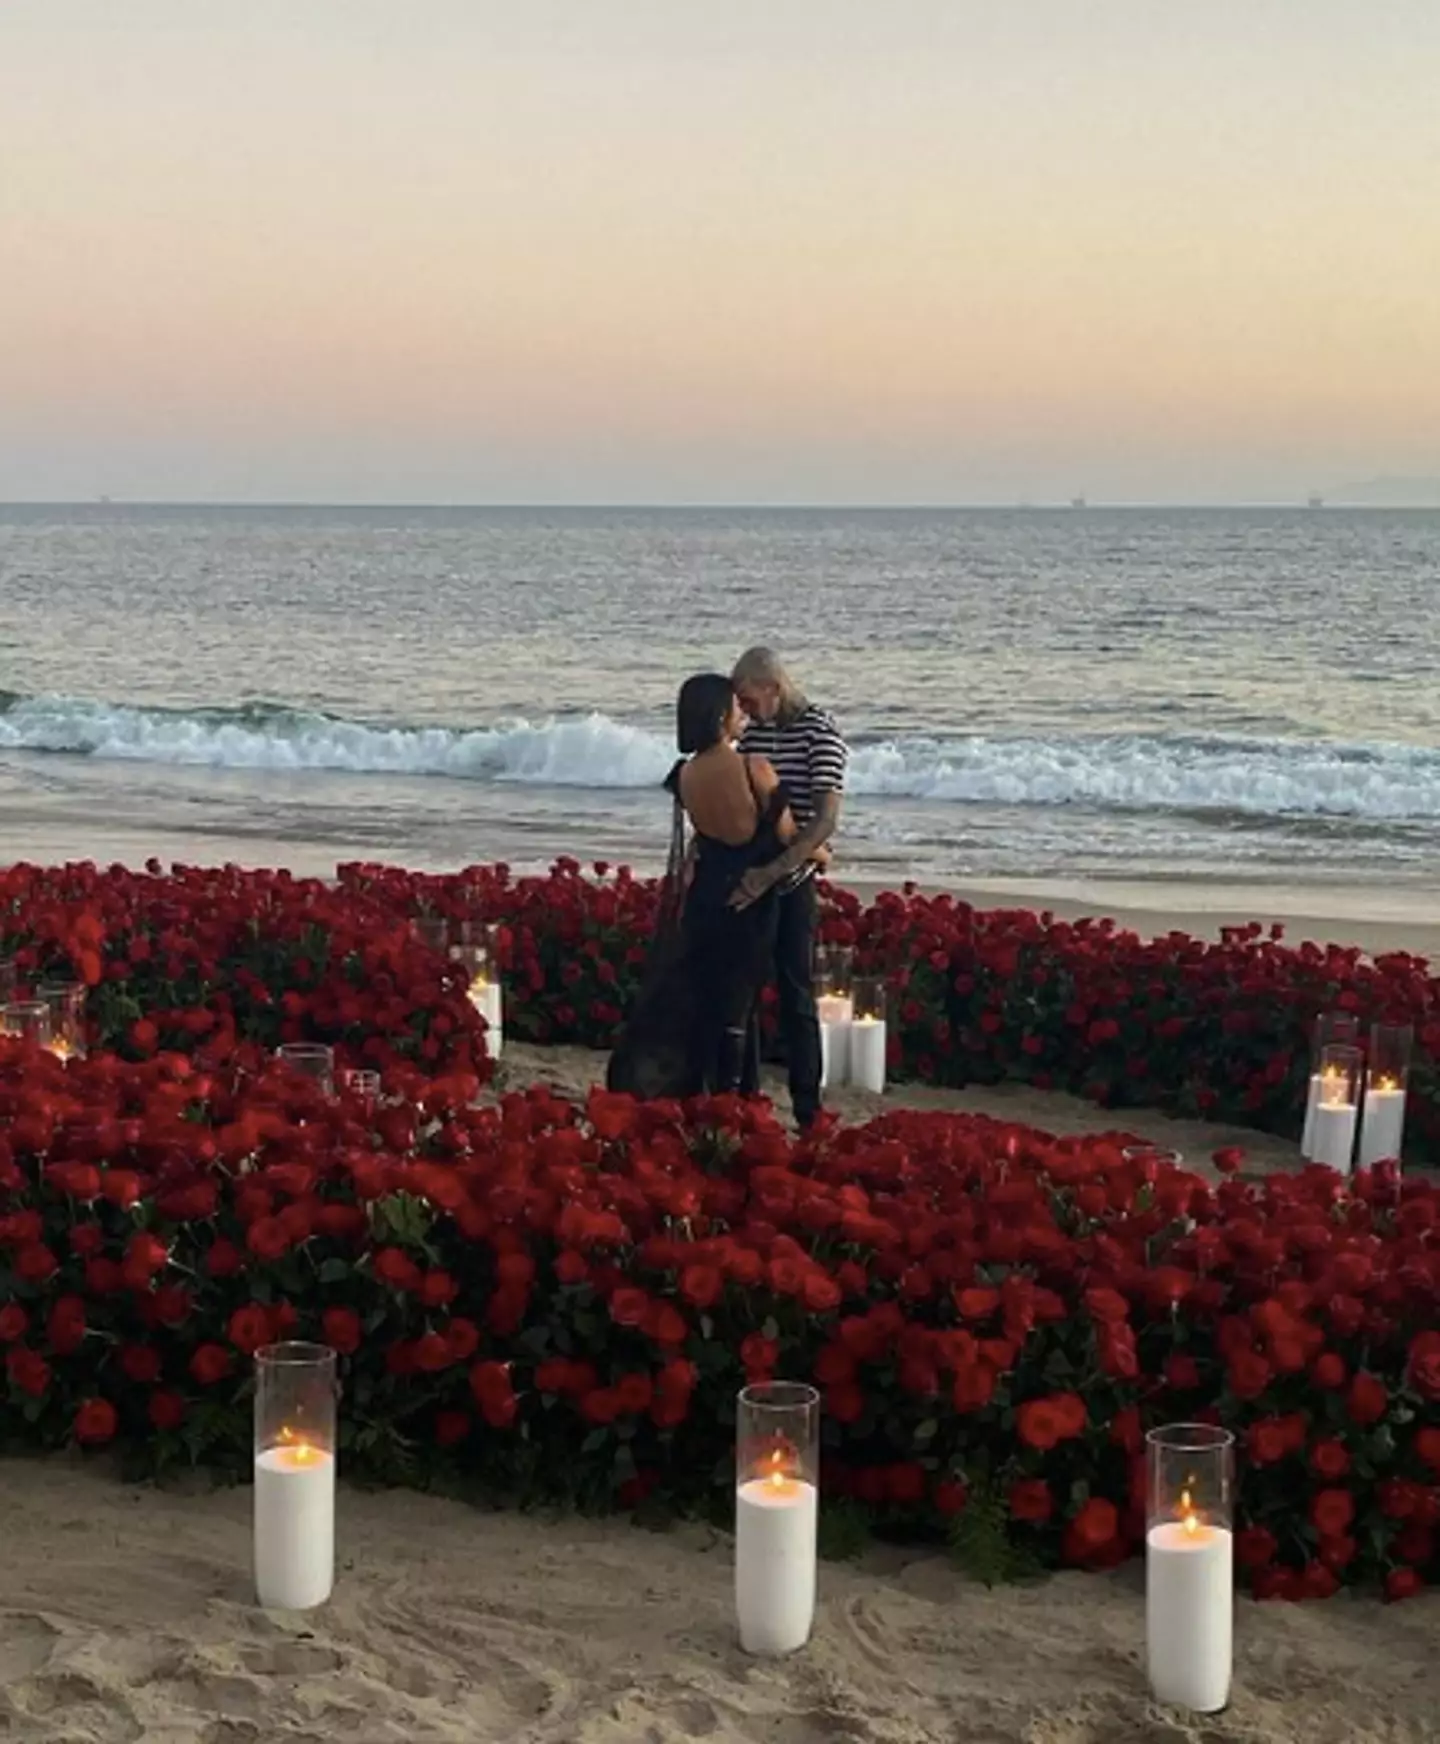 Kourtney shared images of the proposal (